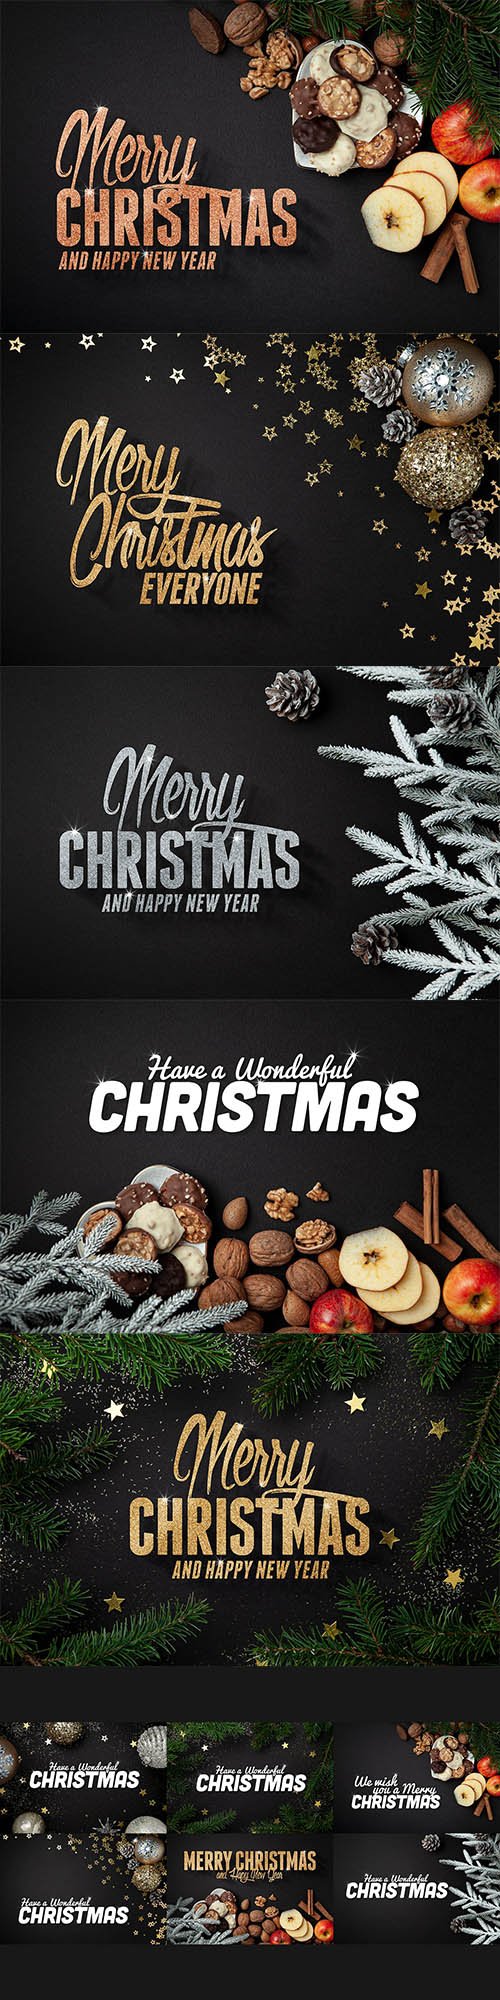 6 Christmas Backgrounds with Editable Text